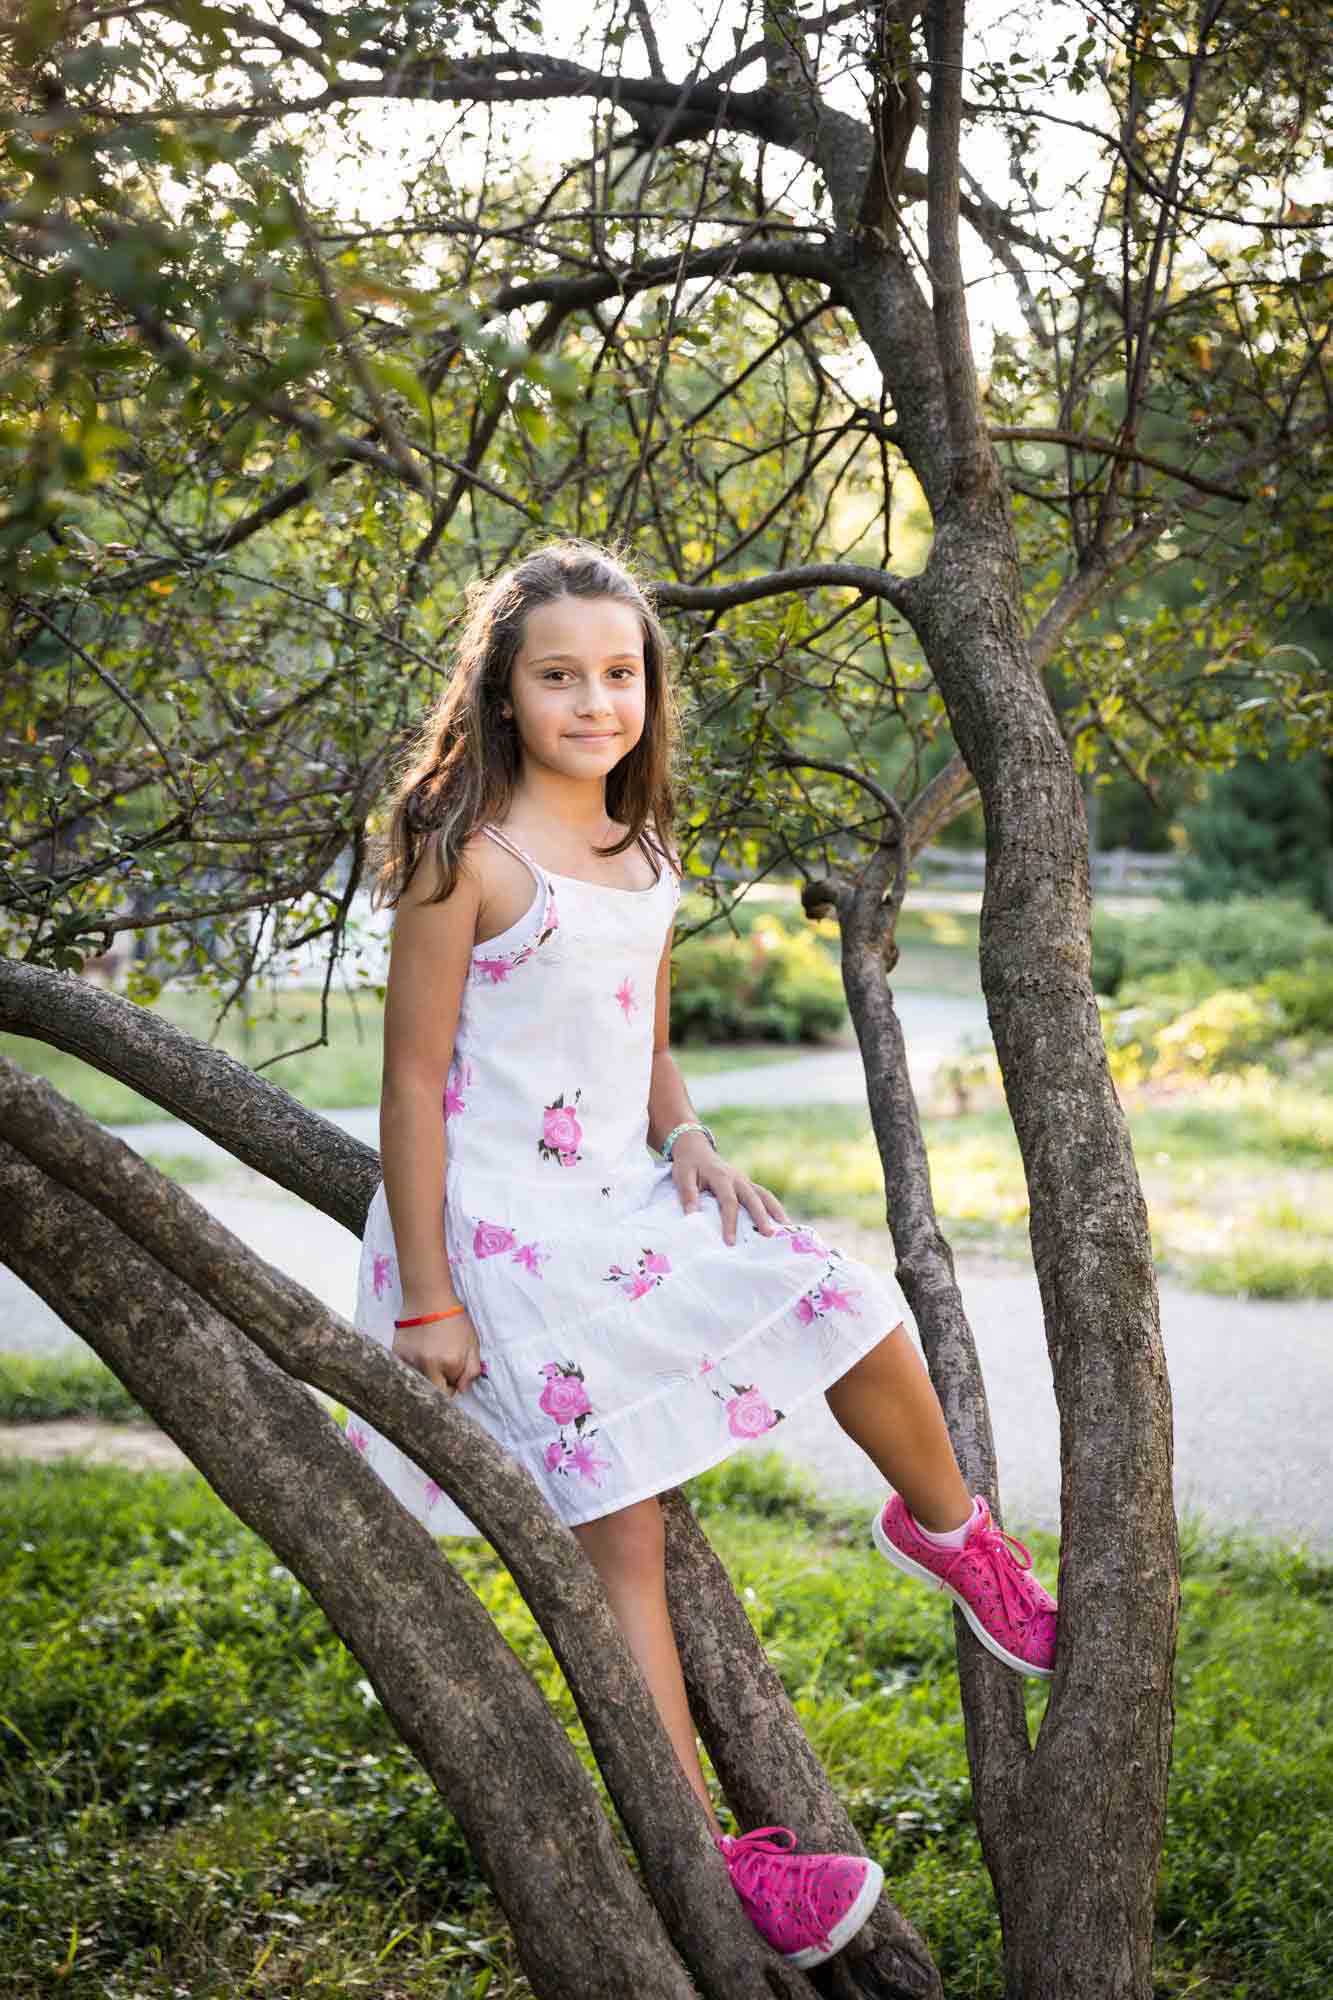 Young girl wearing pink flower dress and sitting in a tree during a Forest Park family photo shoot